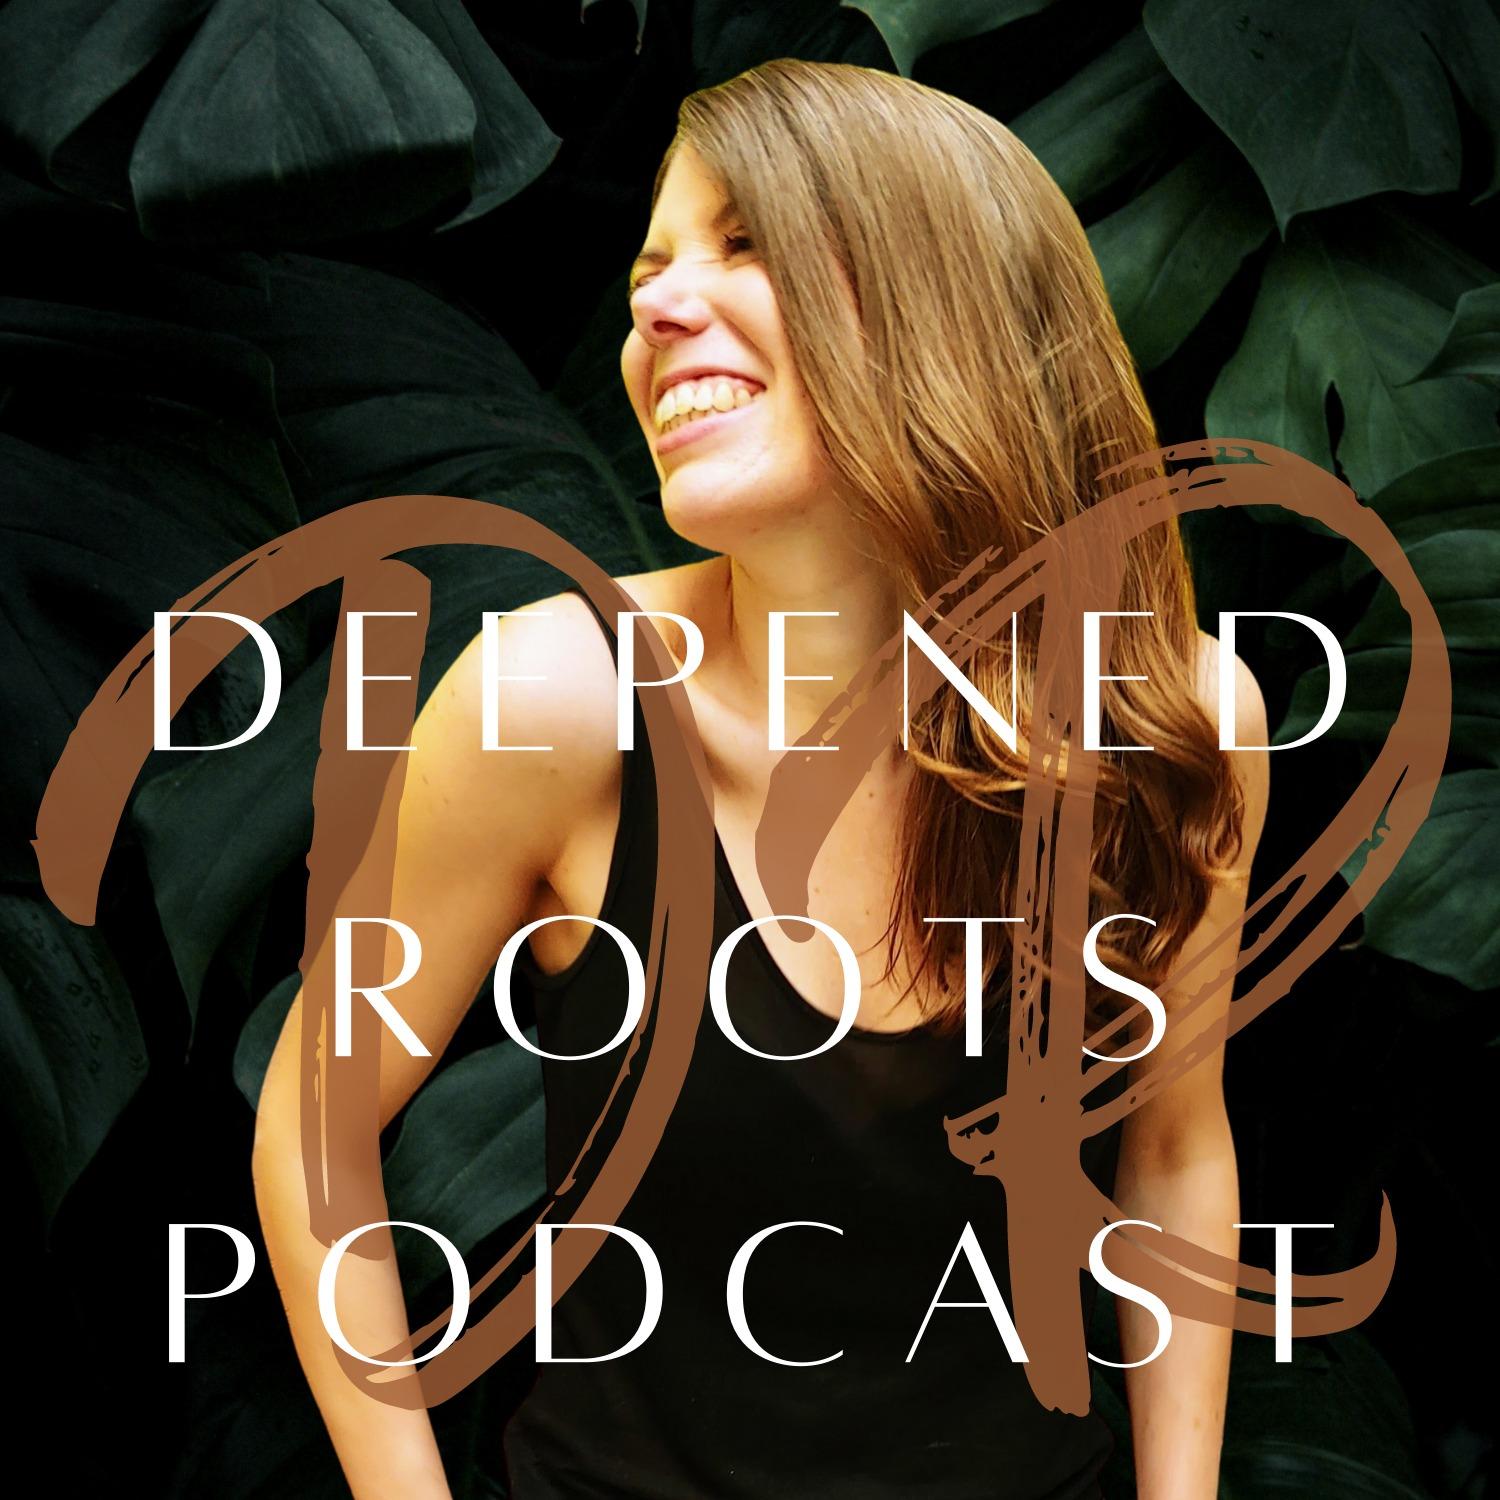 Deepened Roots Podcast